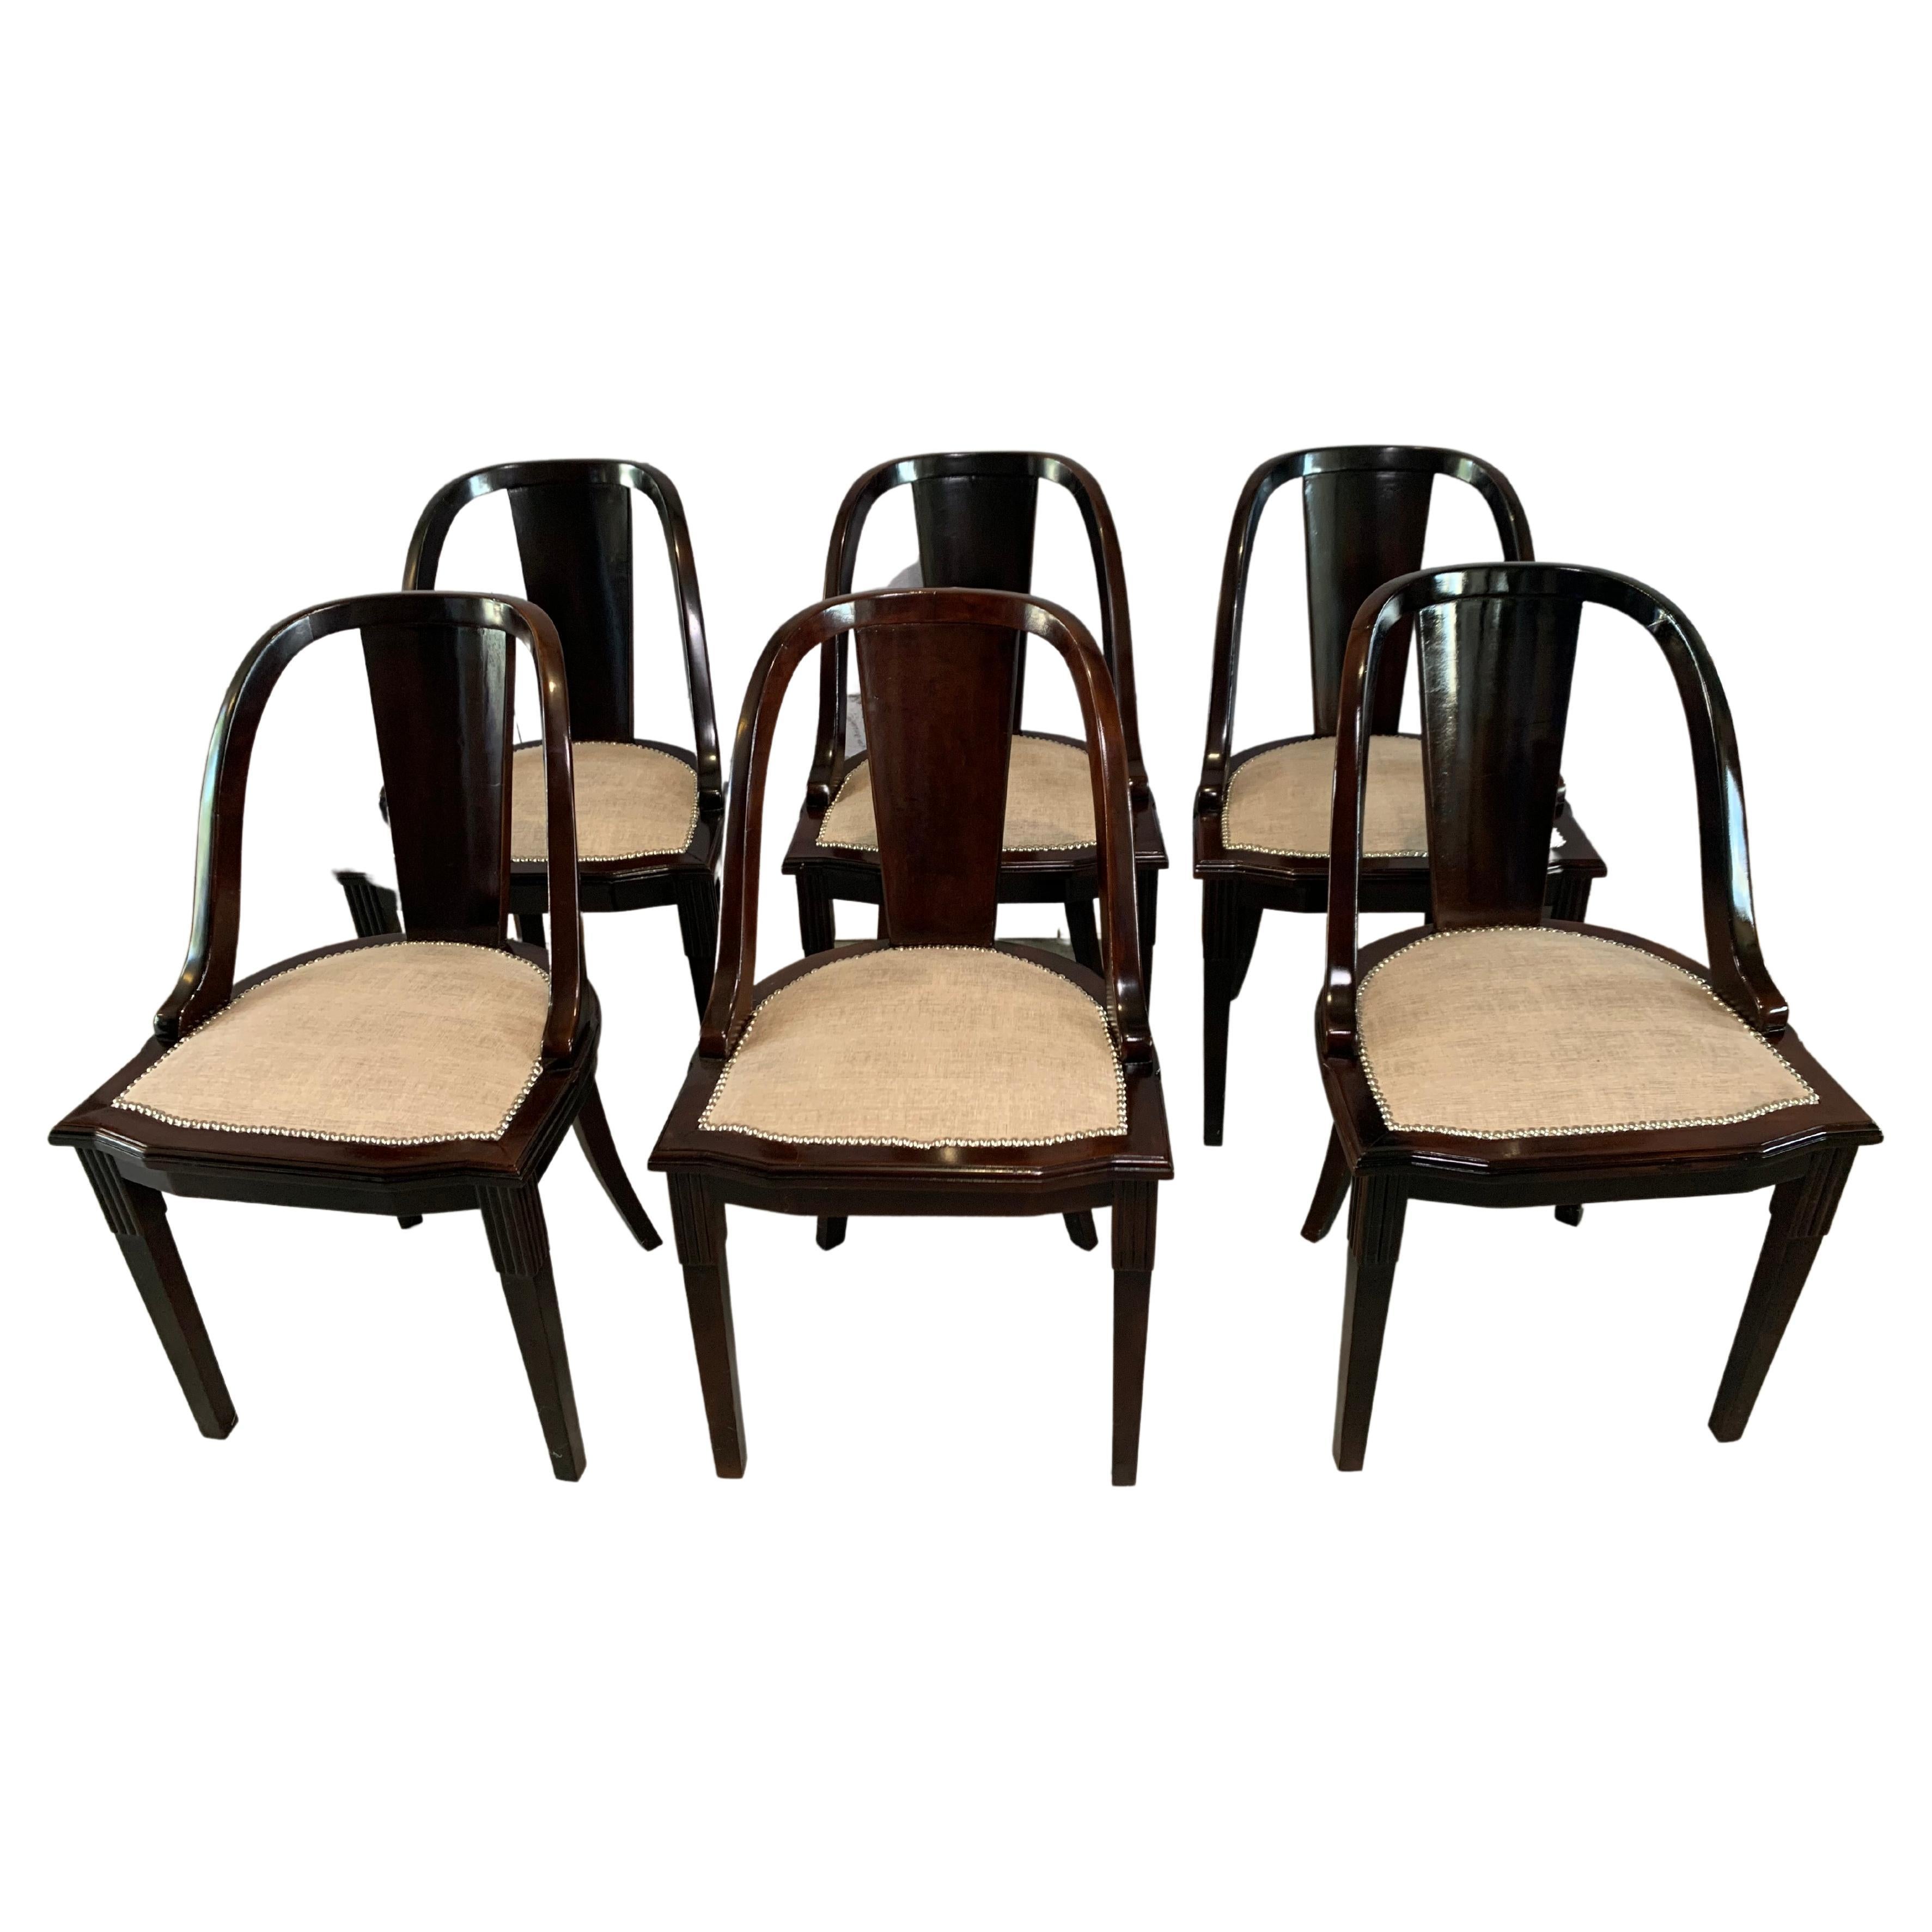 Set of 6 French Art Deco “Gondola” Dining Chairs, 1930s